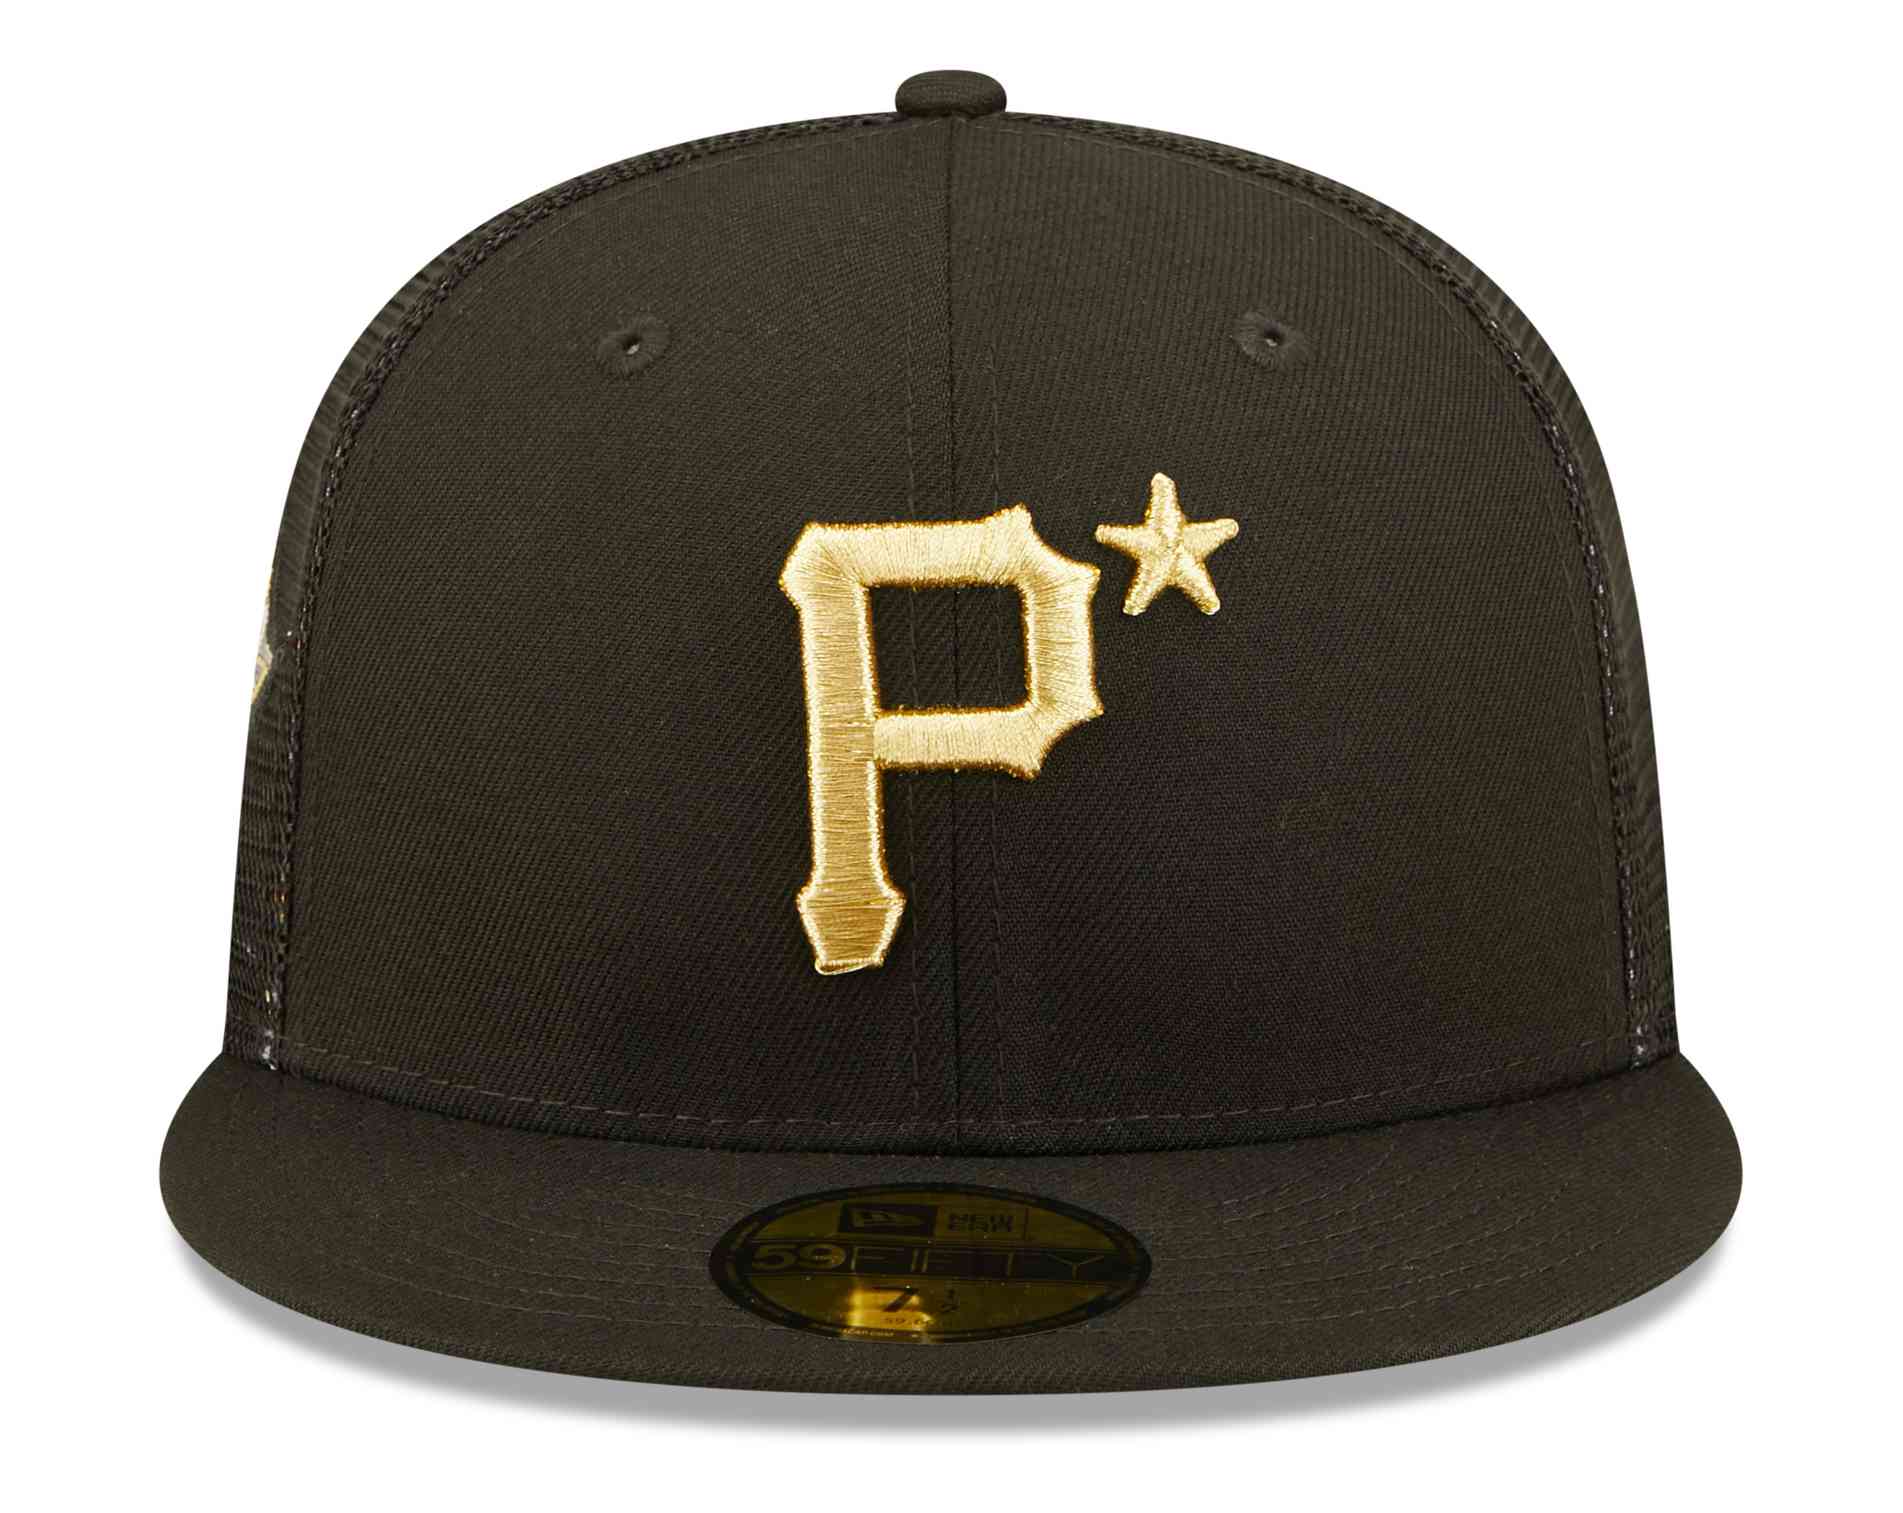 New Era - MLB Pittsburgh Pirates All Star Game Patch 59Fifty Fitted Cap